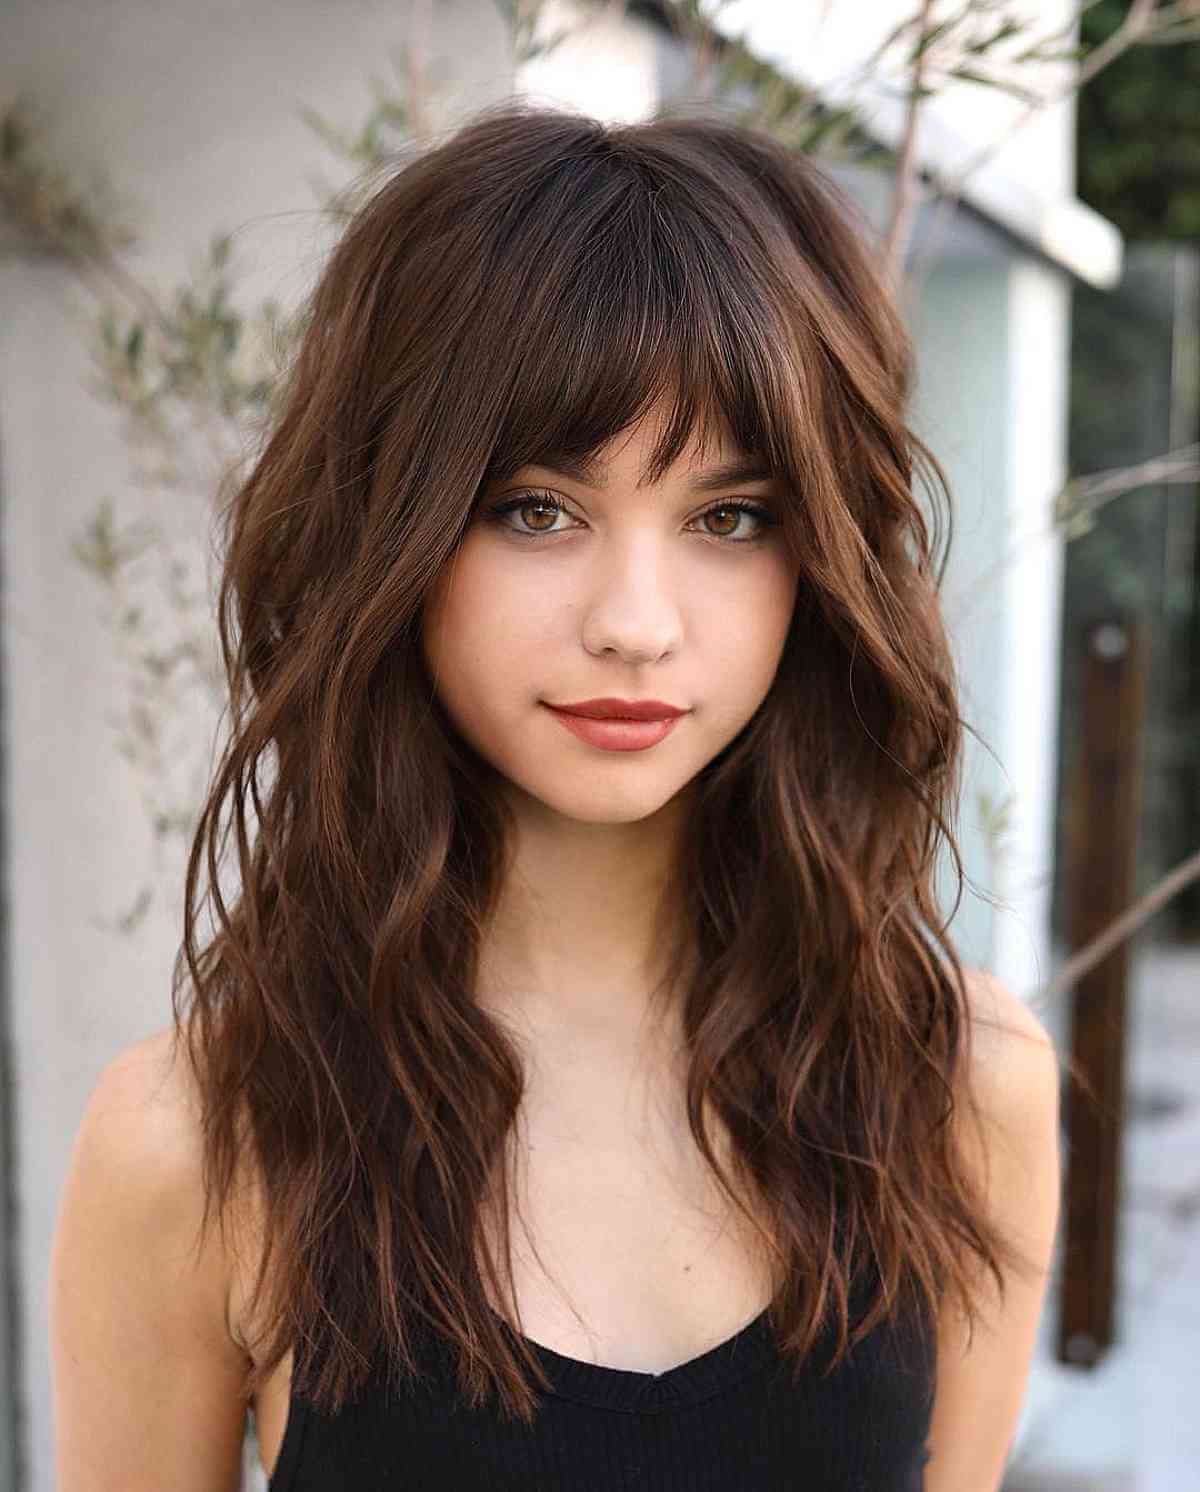 44 Trendy Medium Layered Haircuts With Bangs Intended For Most Popular Dip Dye Medium Layered Hair With Bangs (View 13 of 18)